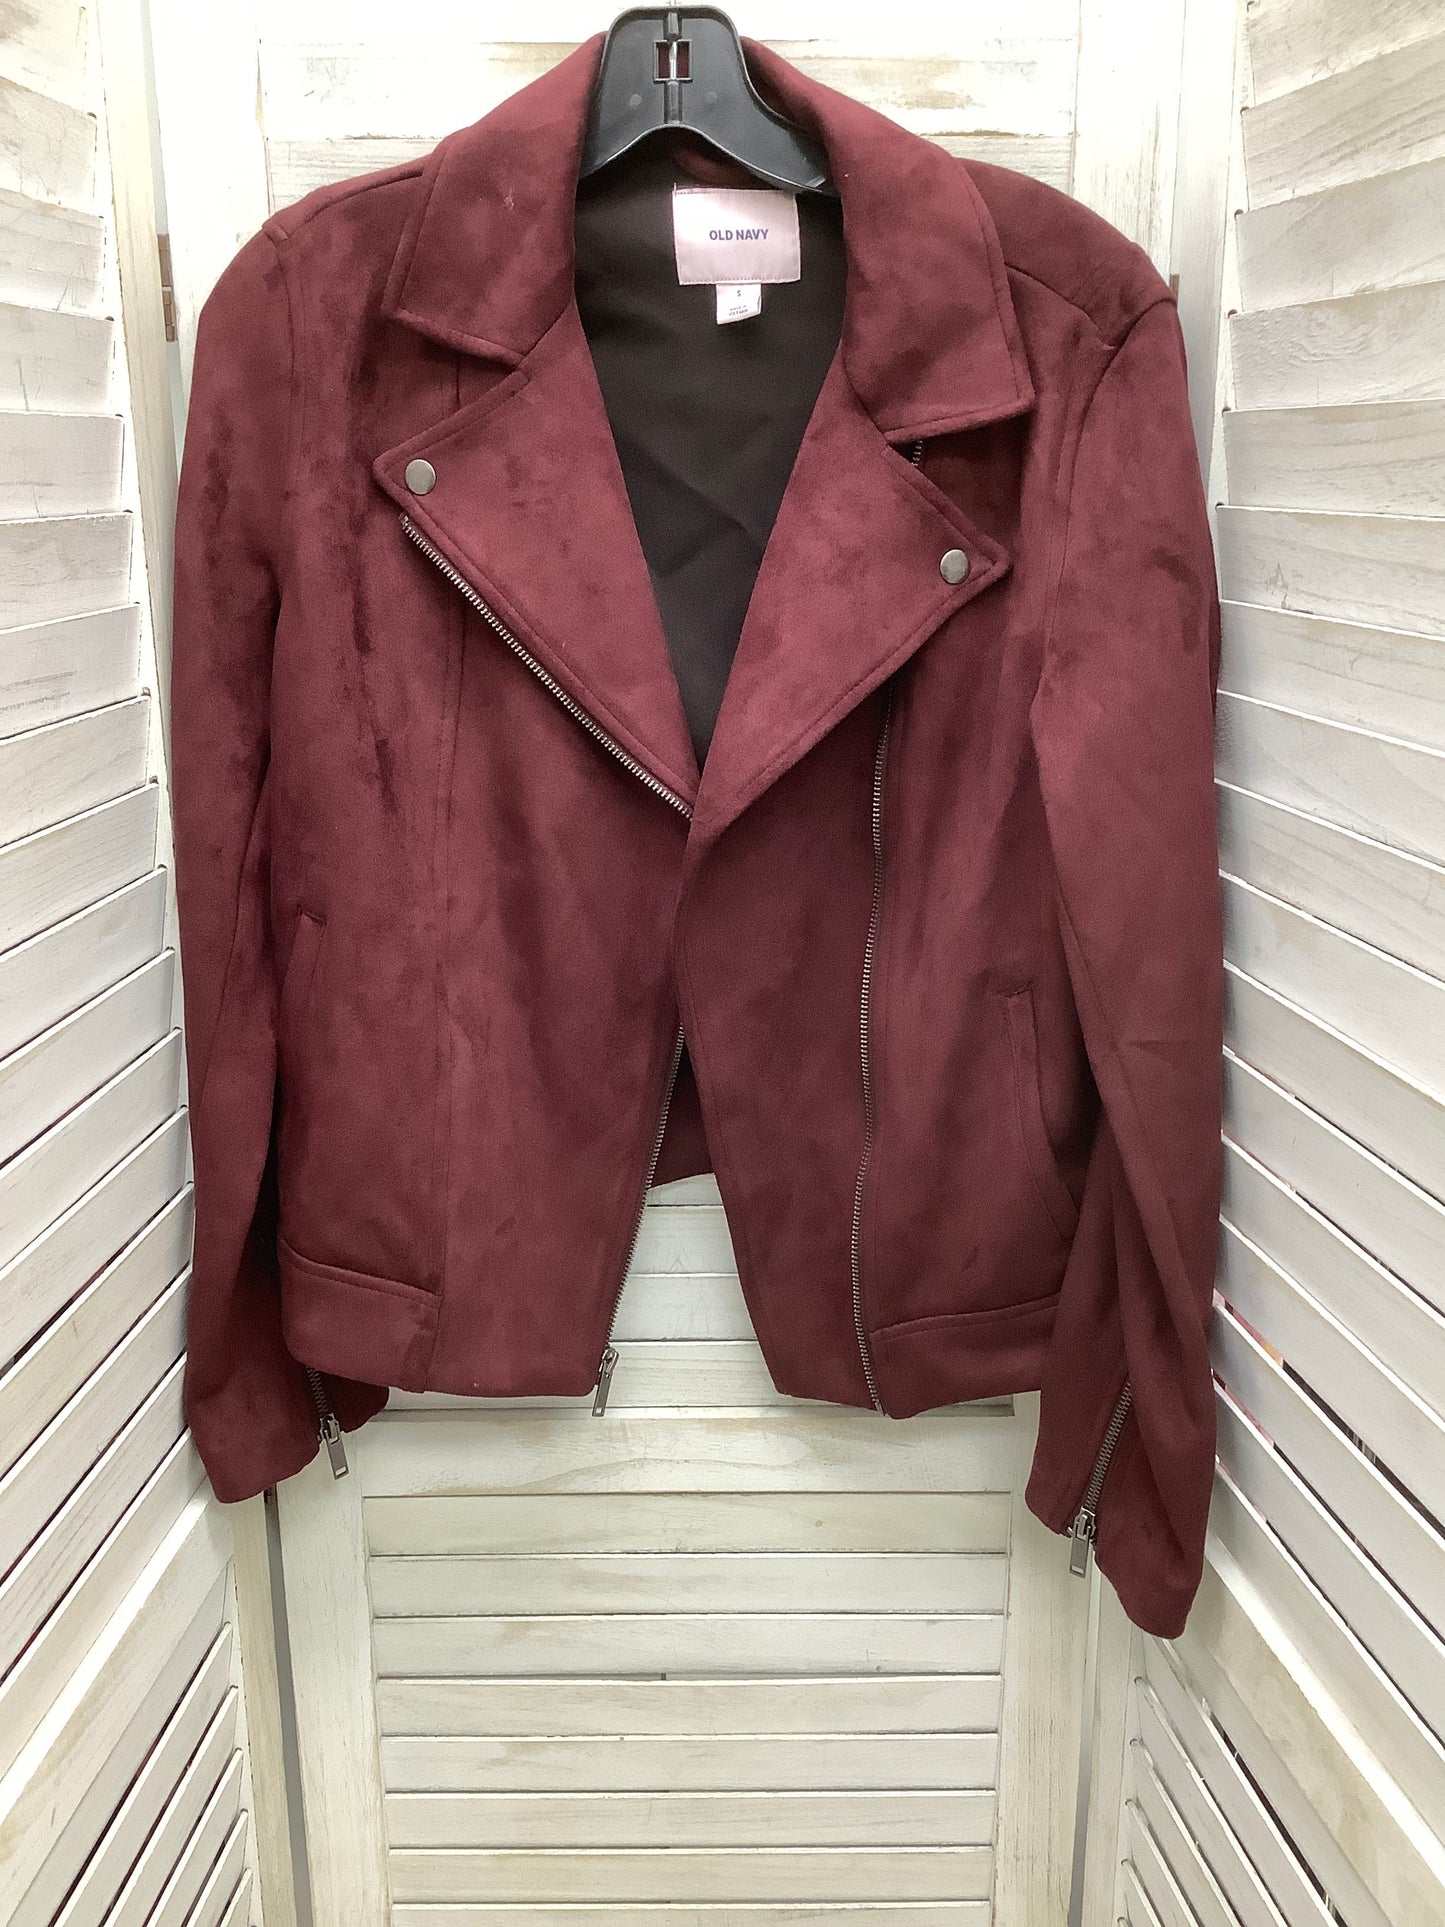 Red Jacket Other Old Navy, Size S